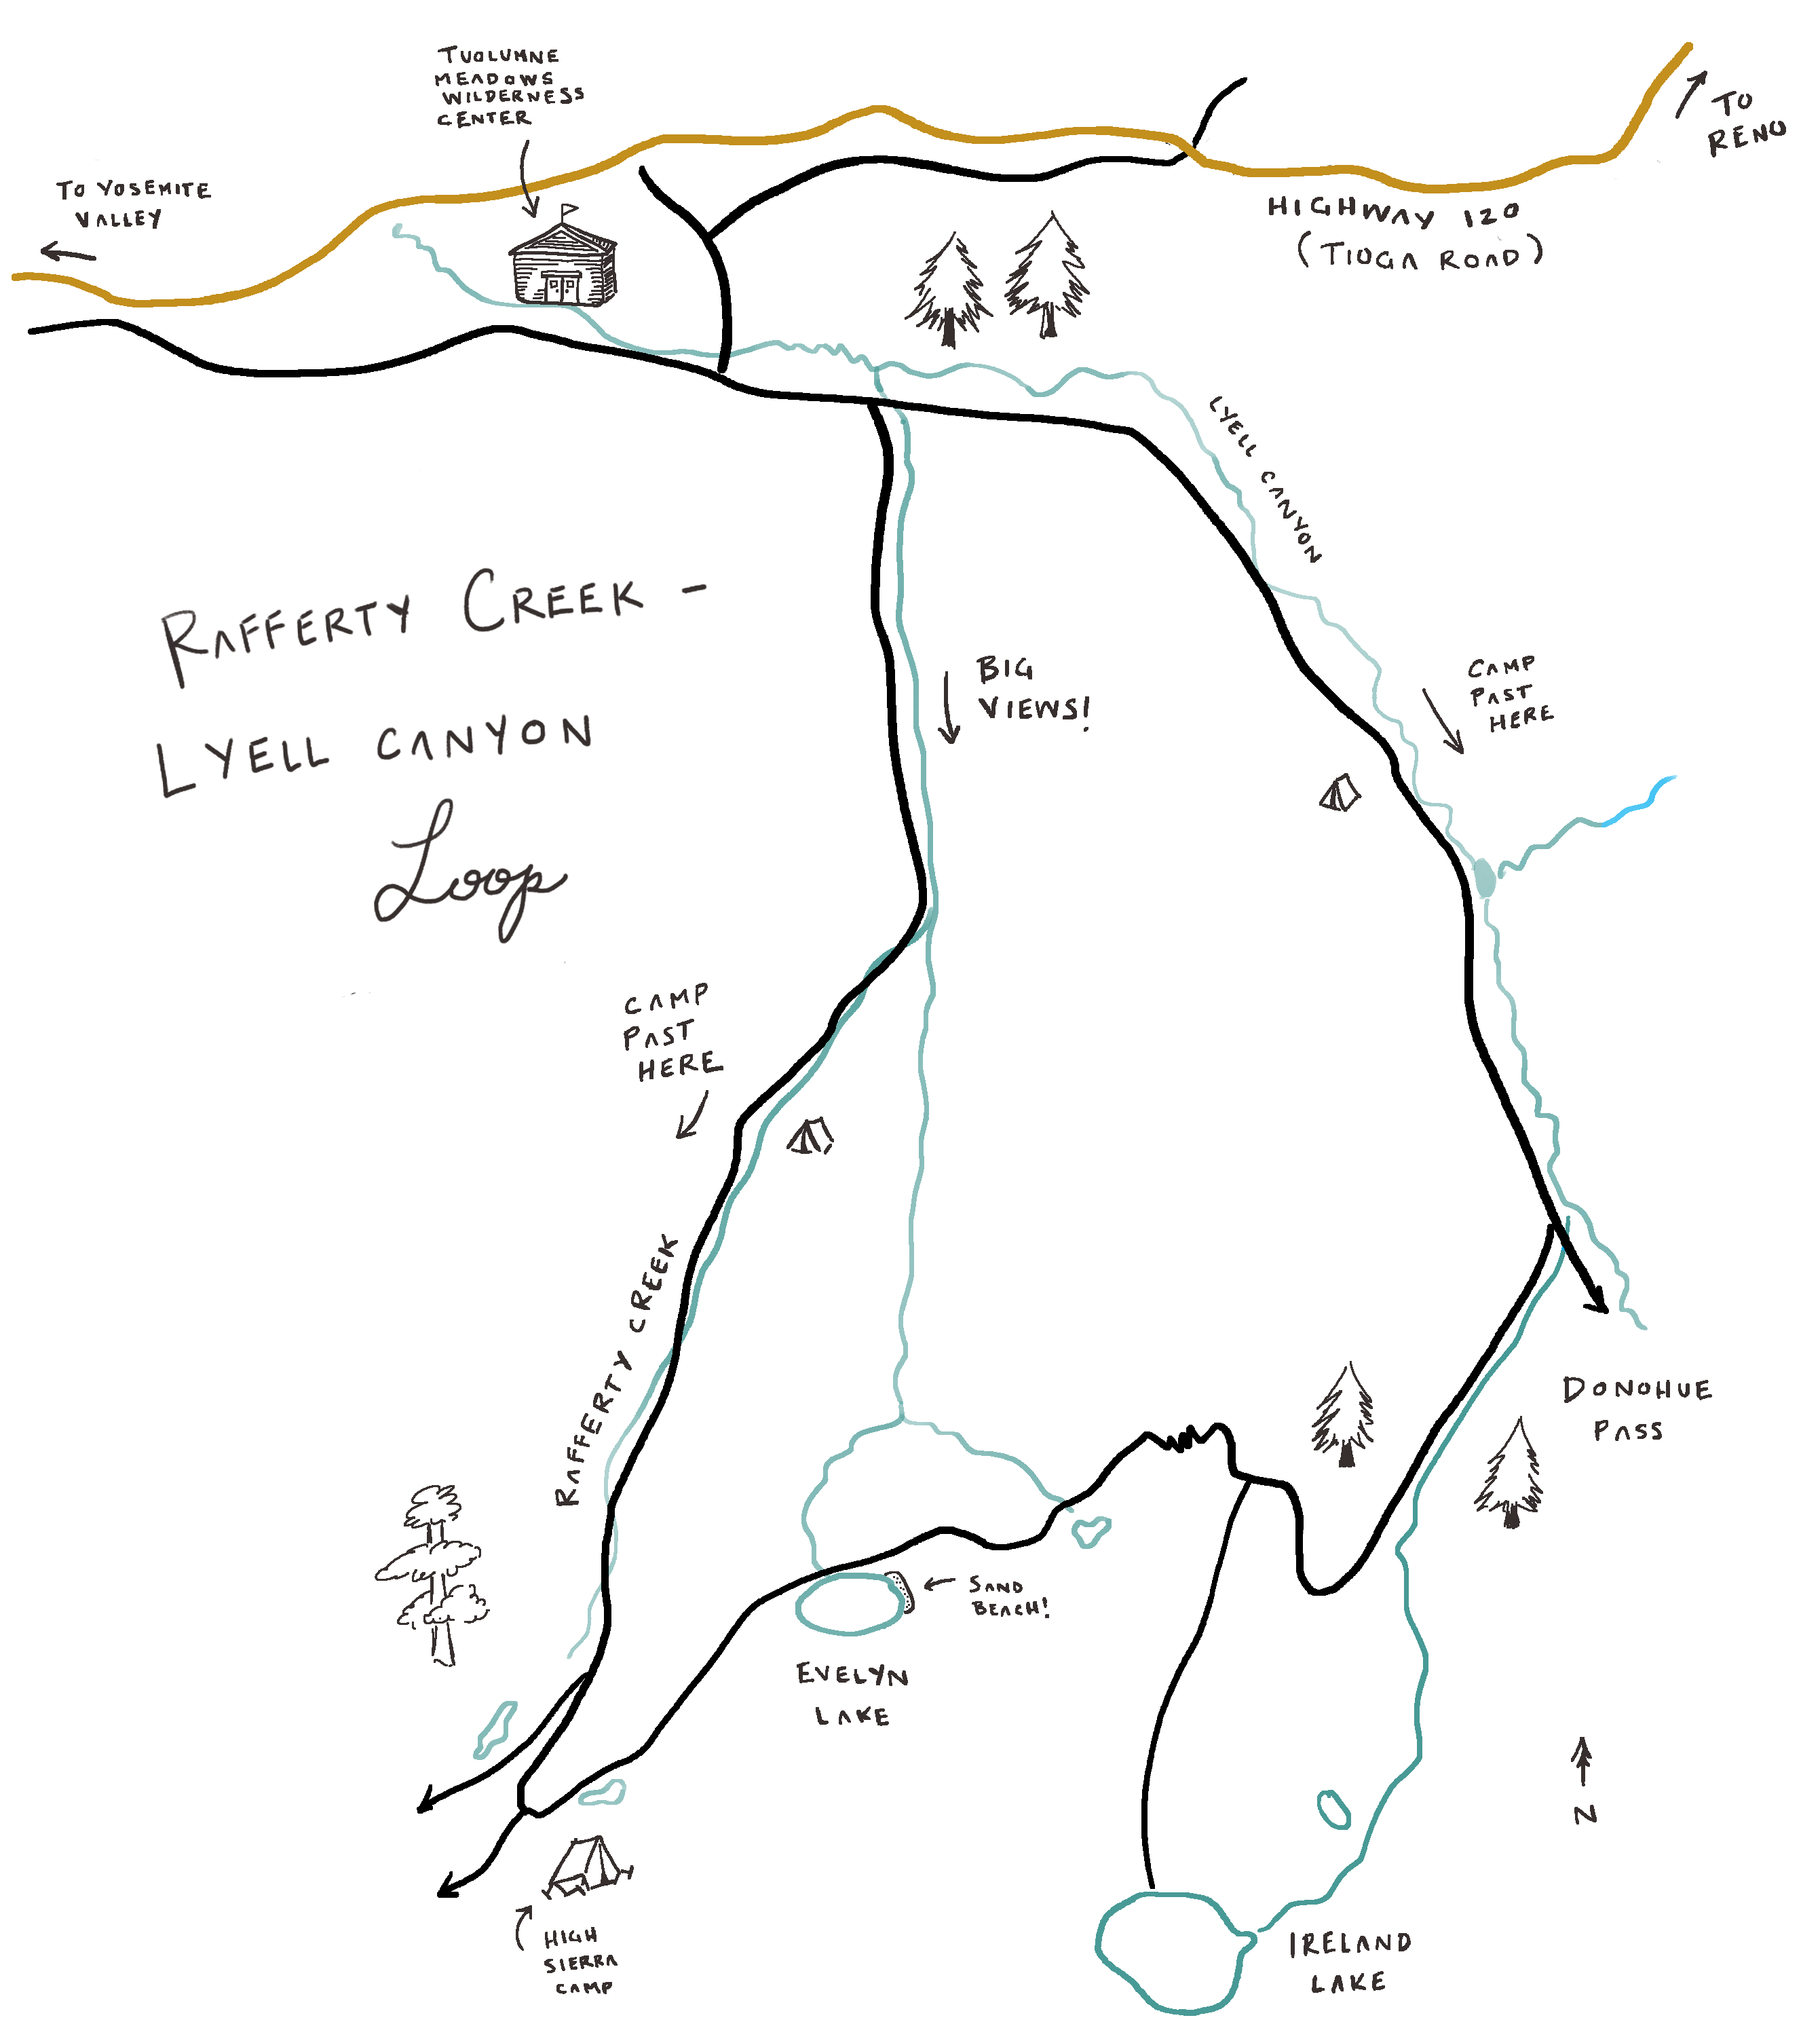 Lyell Canyon Vogelsang loop in Yosemite National Park backpacking guide map